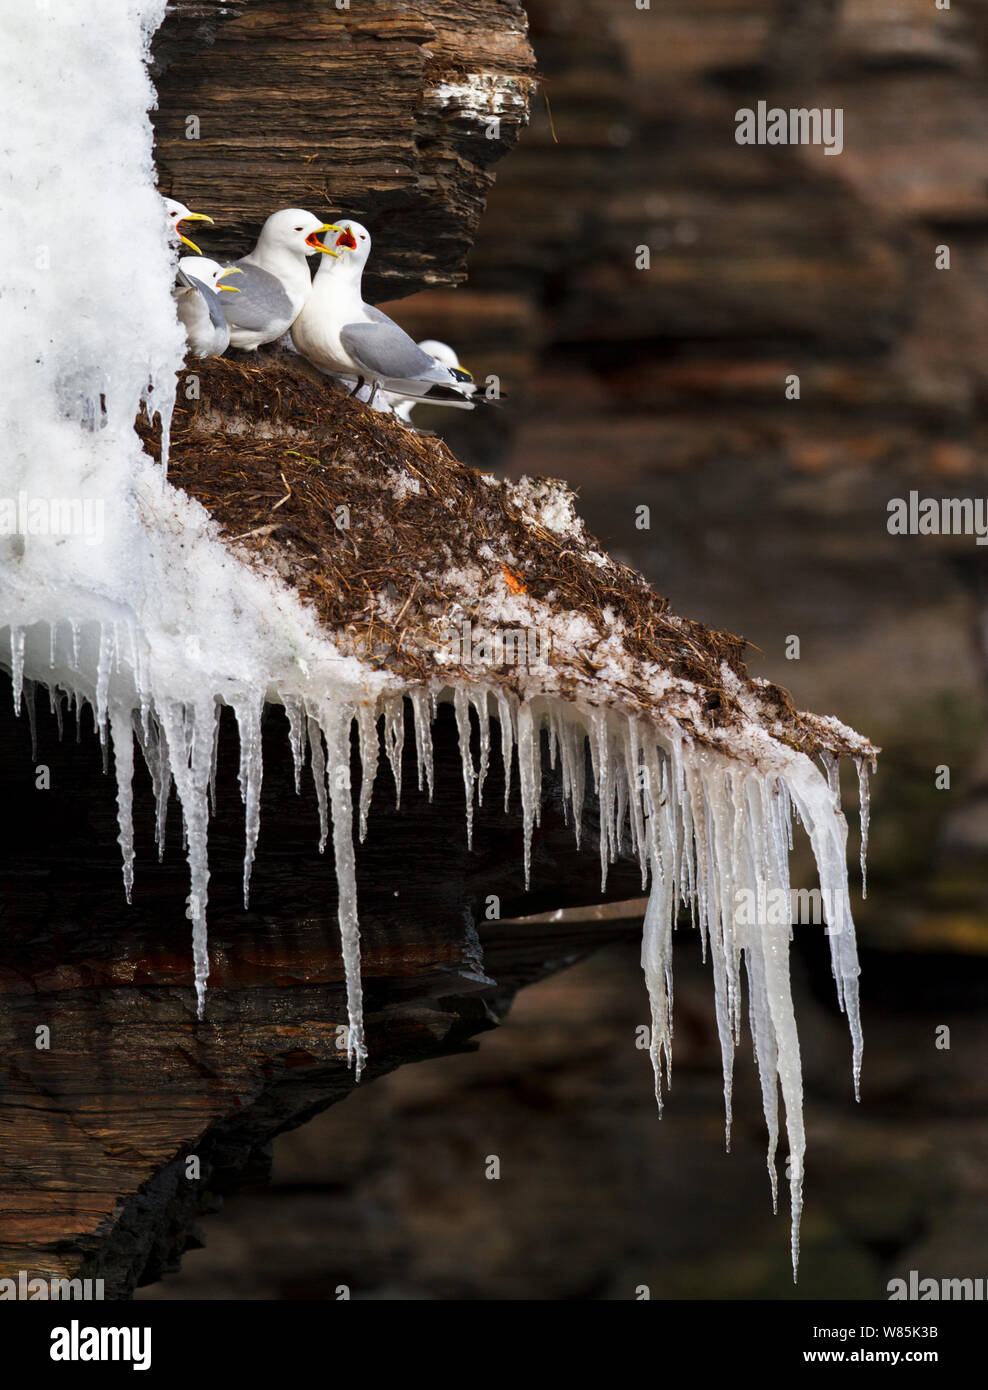 Kittiwakes (Rissa tridactyla) at nesting cliff with icicles, Ekkeroy bird cliff. Finnmark, Norway. March. Stock Photo